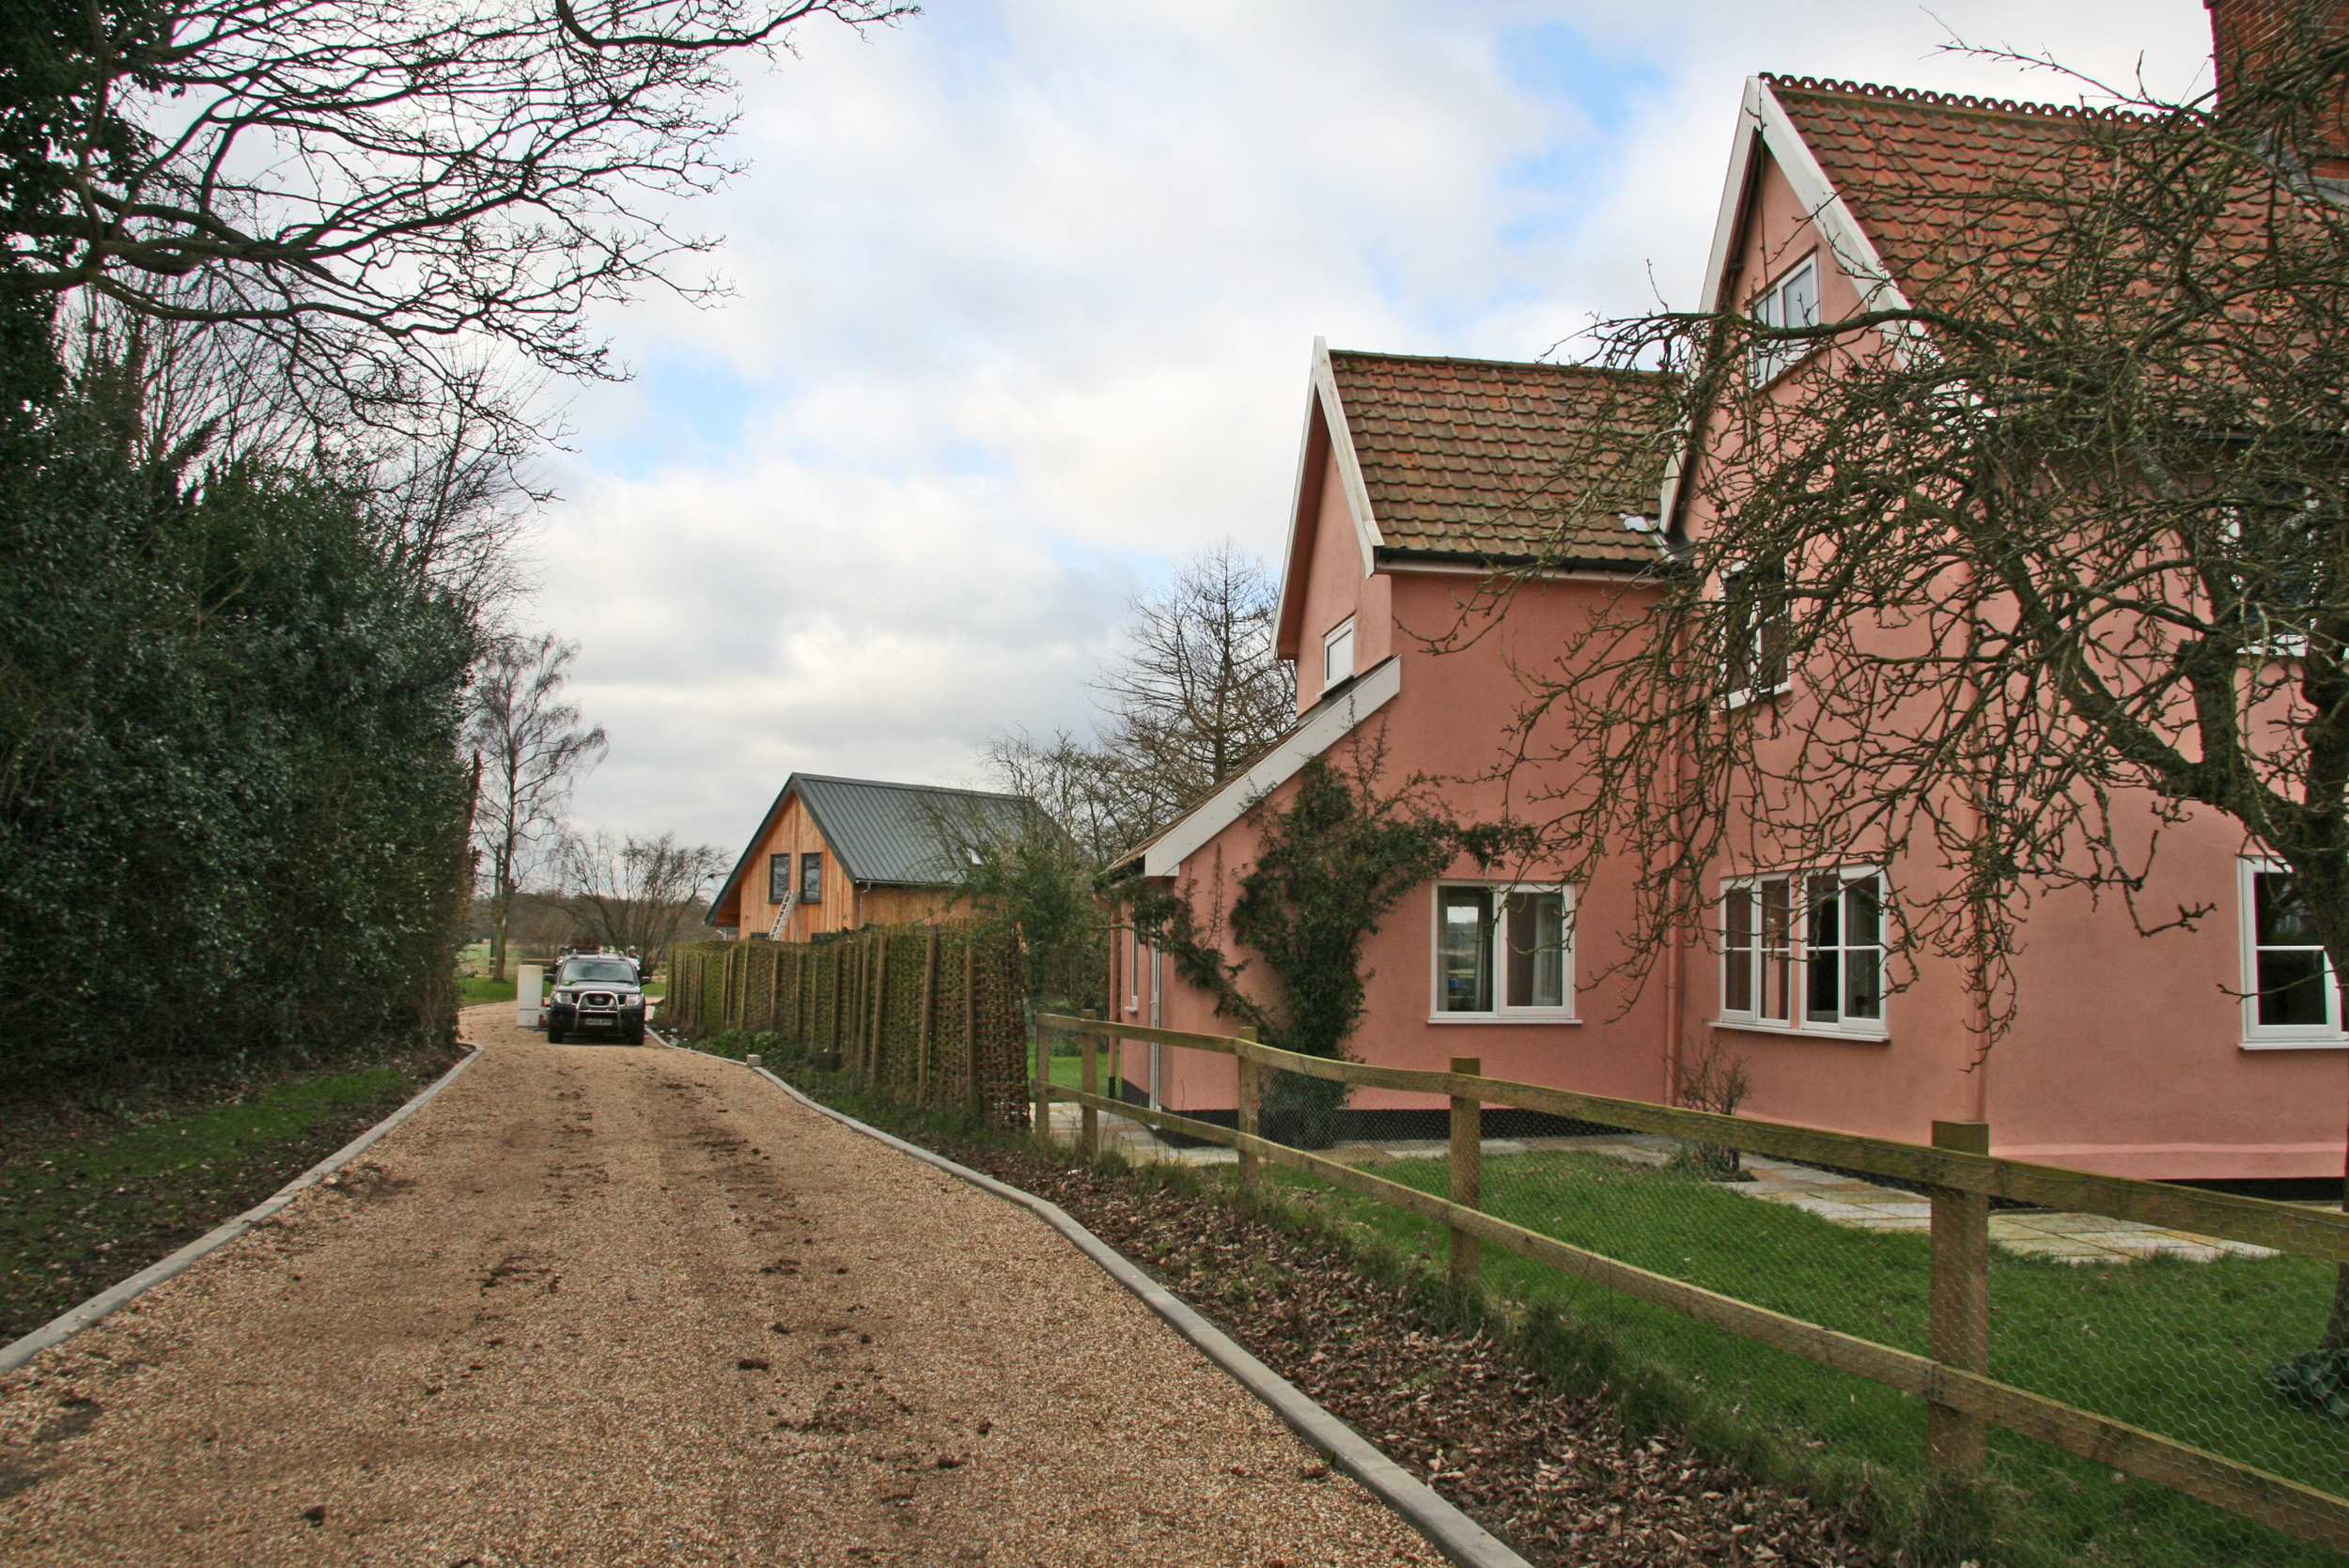  The project involved the segregation of a parcel of land within our clients land for the erection of a new dwelling for them to occupy. The host property, Church Farm House is of a traditional Suffolk Farmhouse aesthetic, which the new dwelling woul